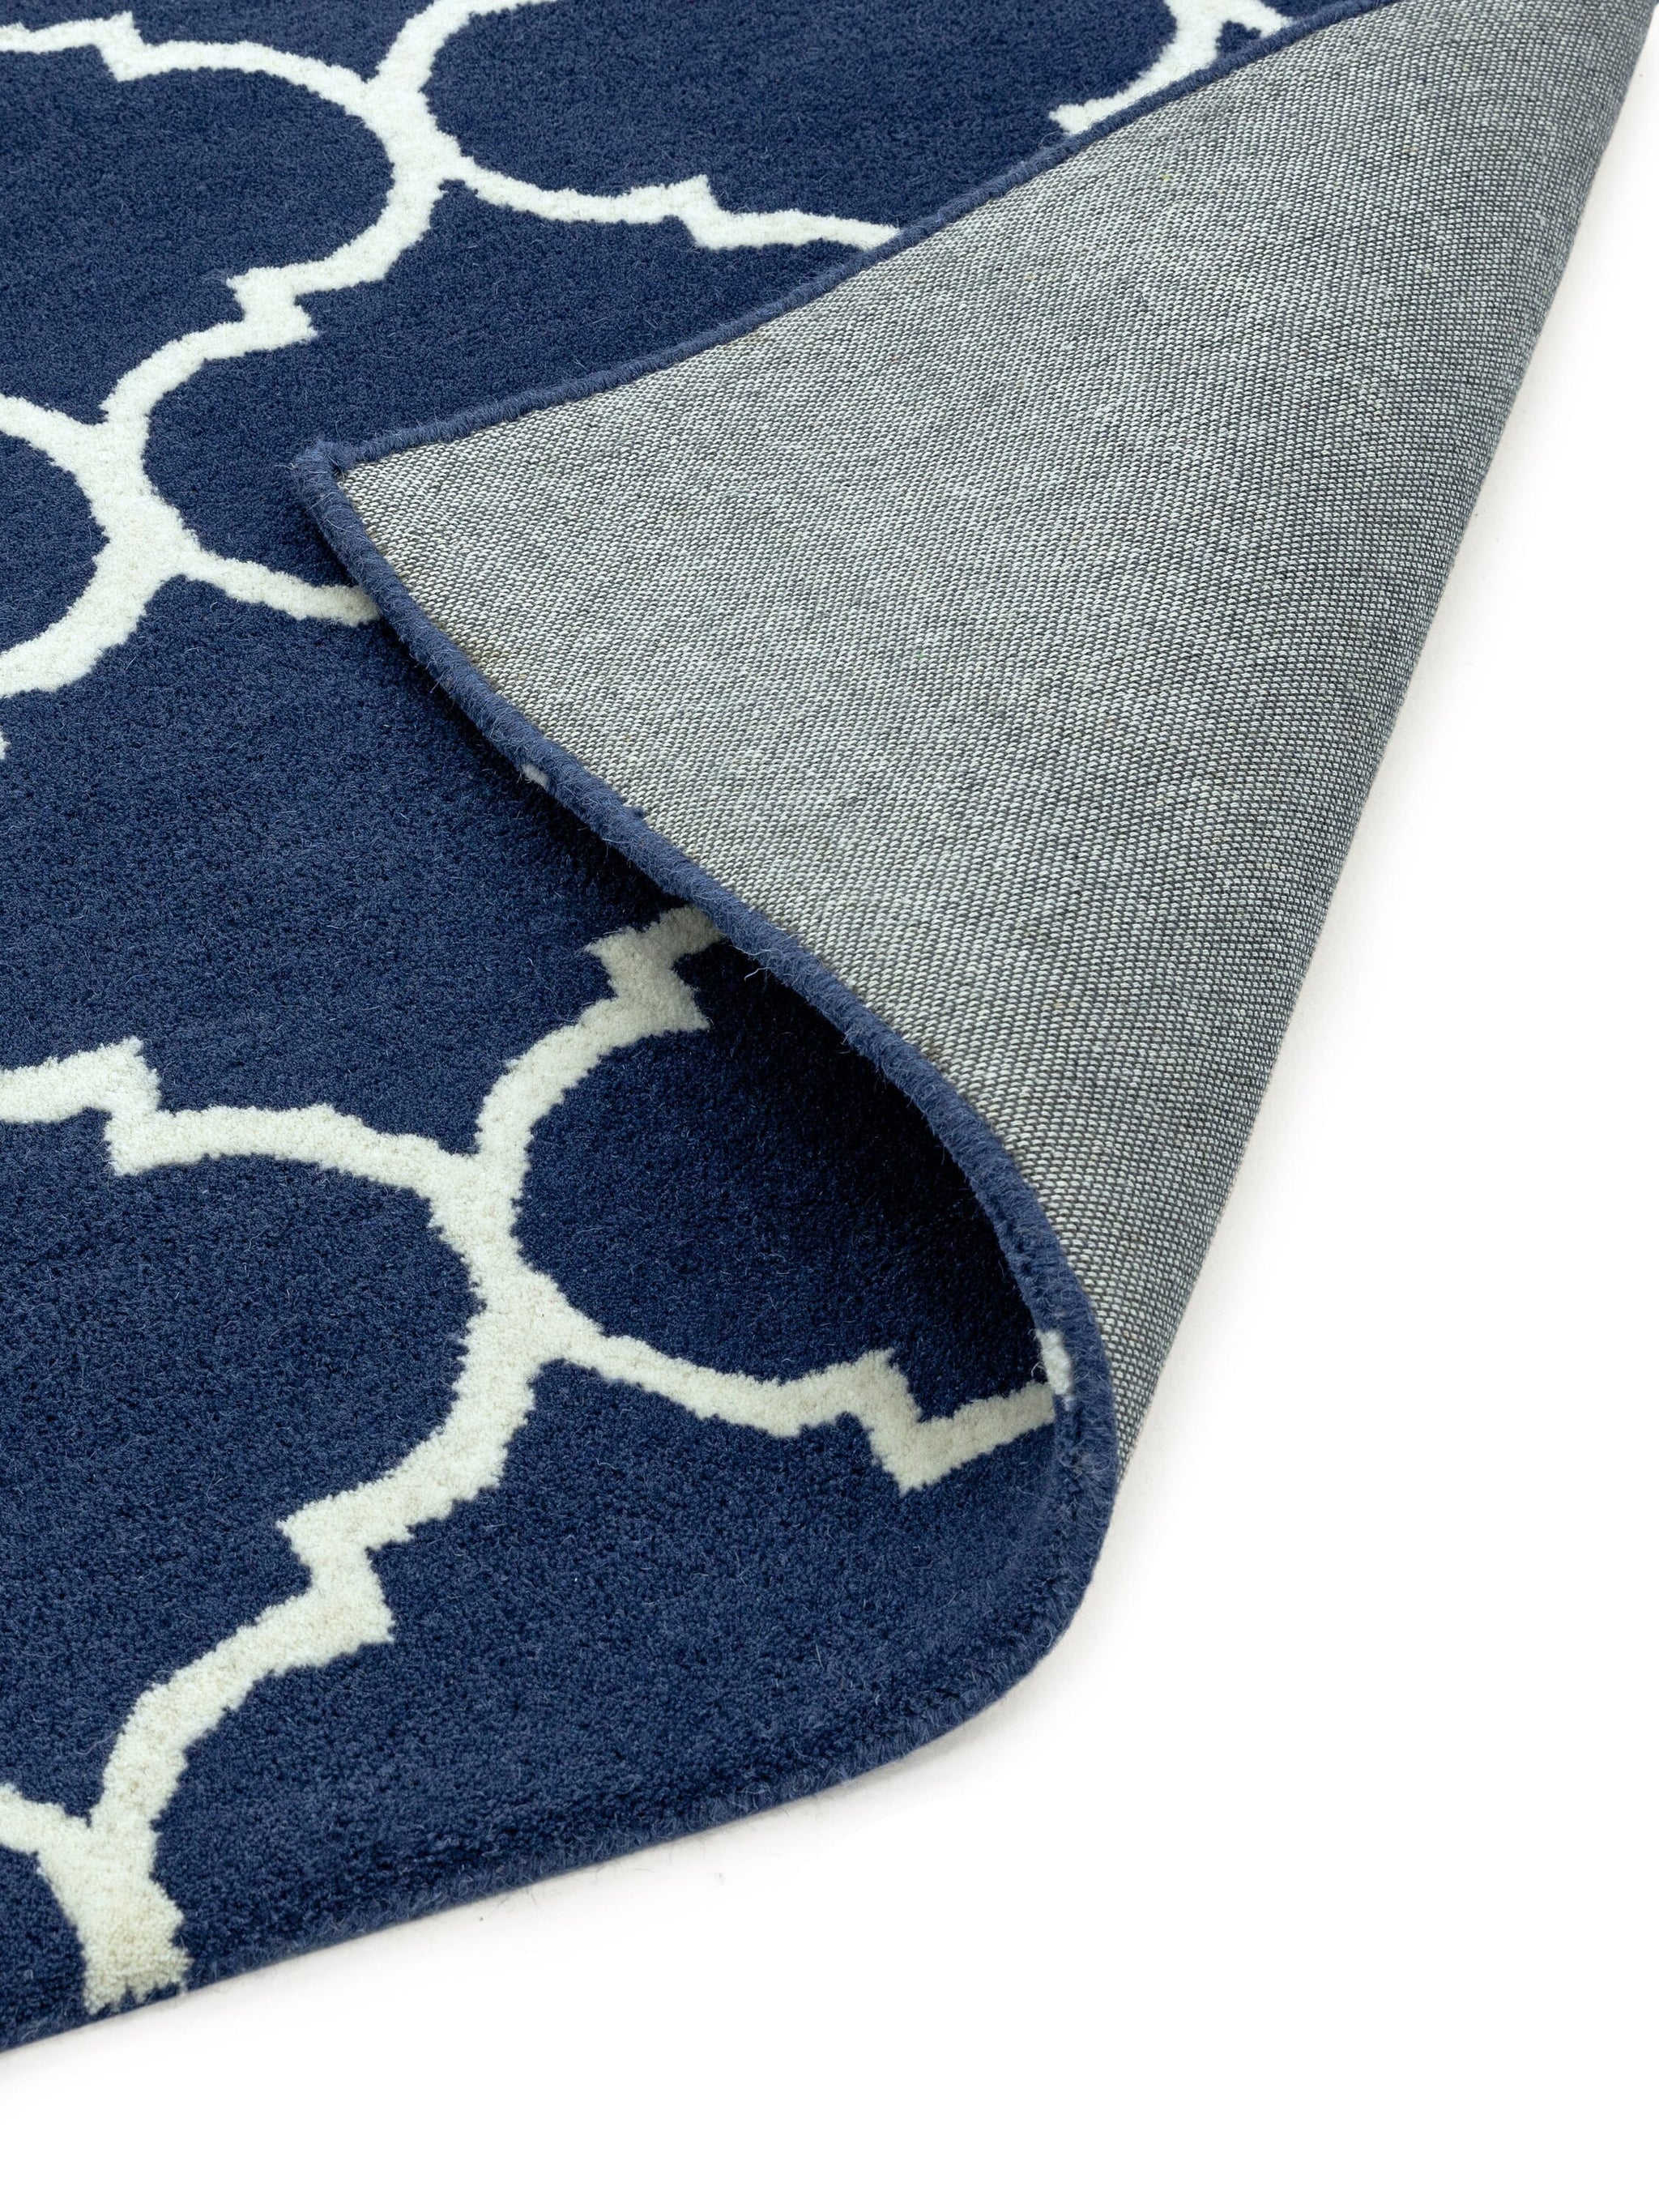 Albany Ogee Blue Hand Tufted Contemporary Wool Rug